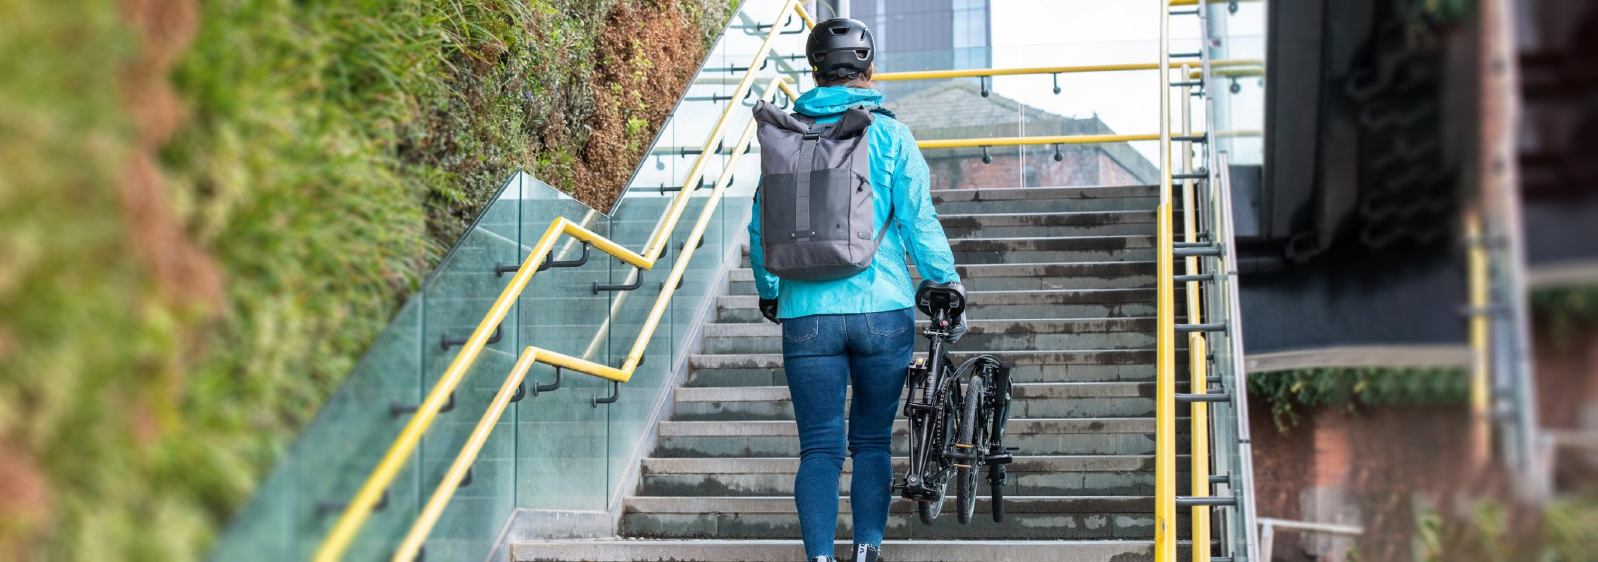 Commuter cycling into town with a backpack to carry all her essentials - Eurocycles Dublin